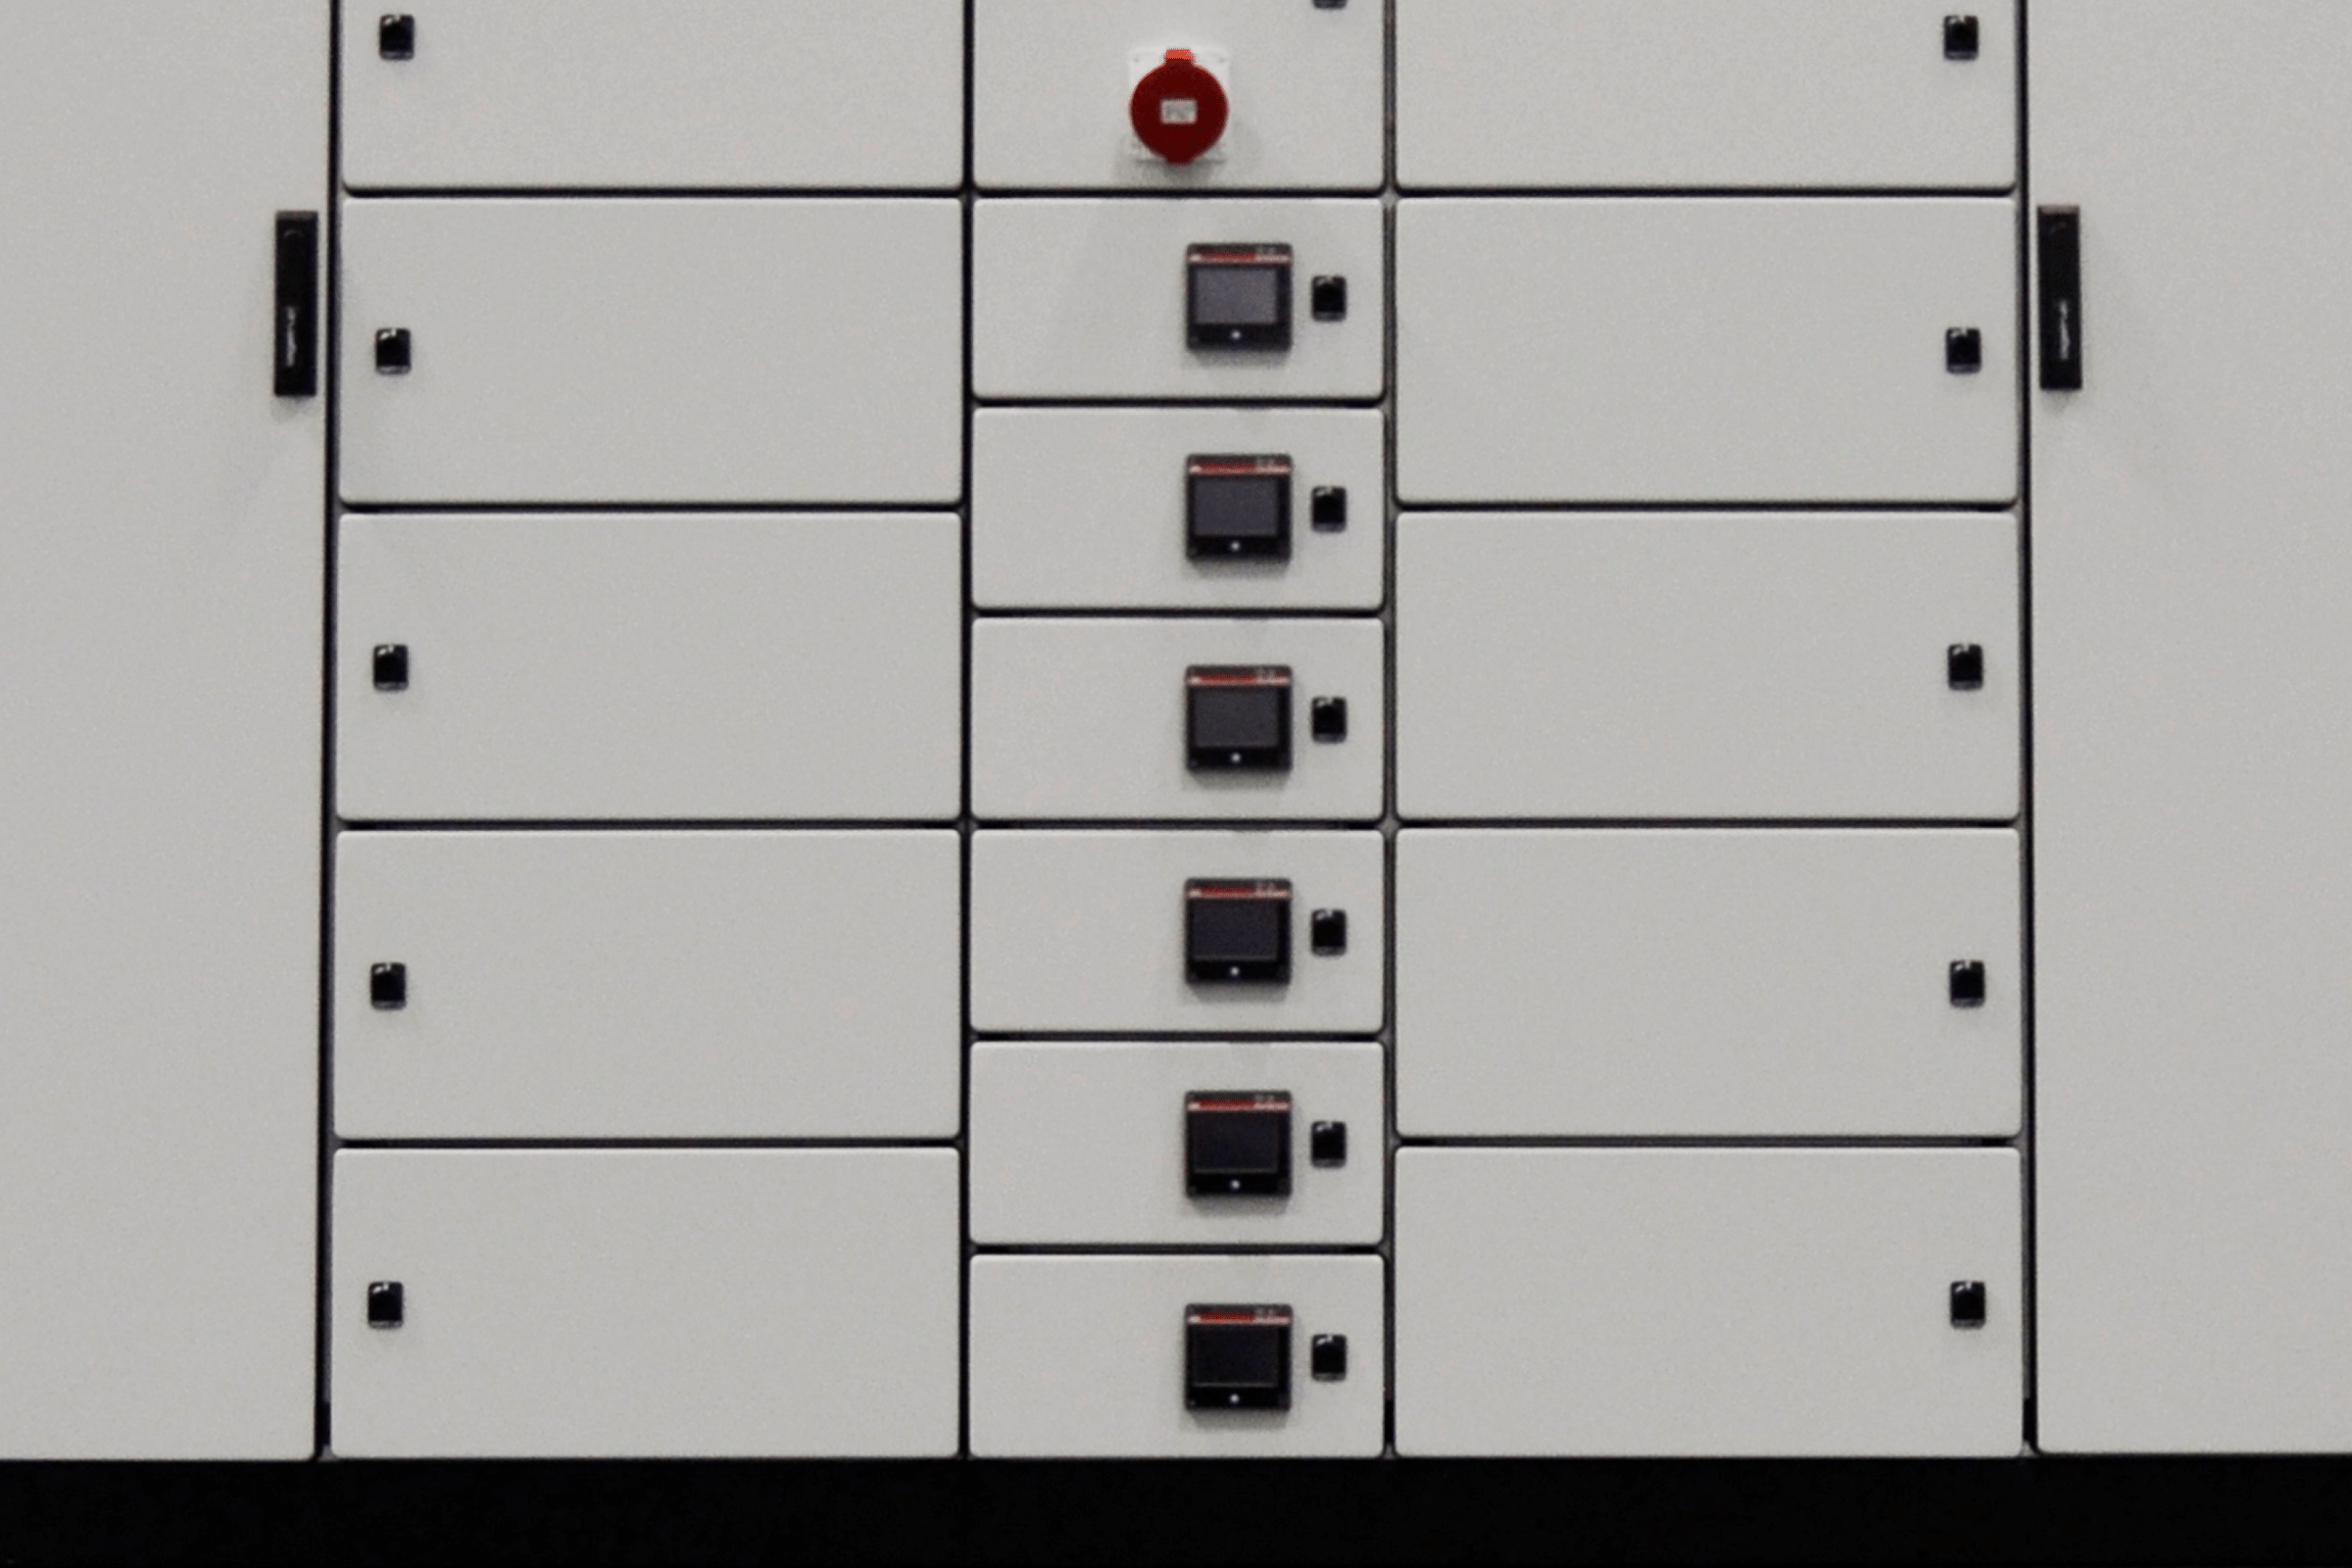 Fixed Functional Units in Logstrup's Low Voltage Switchbord